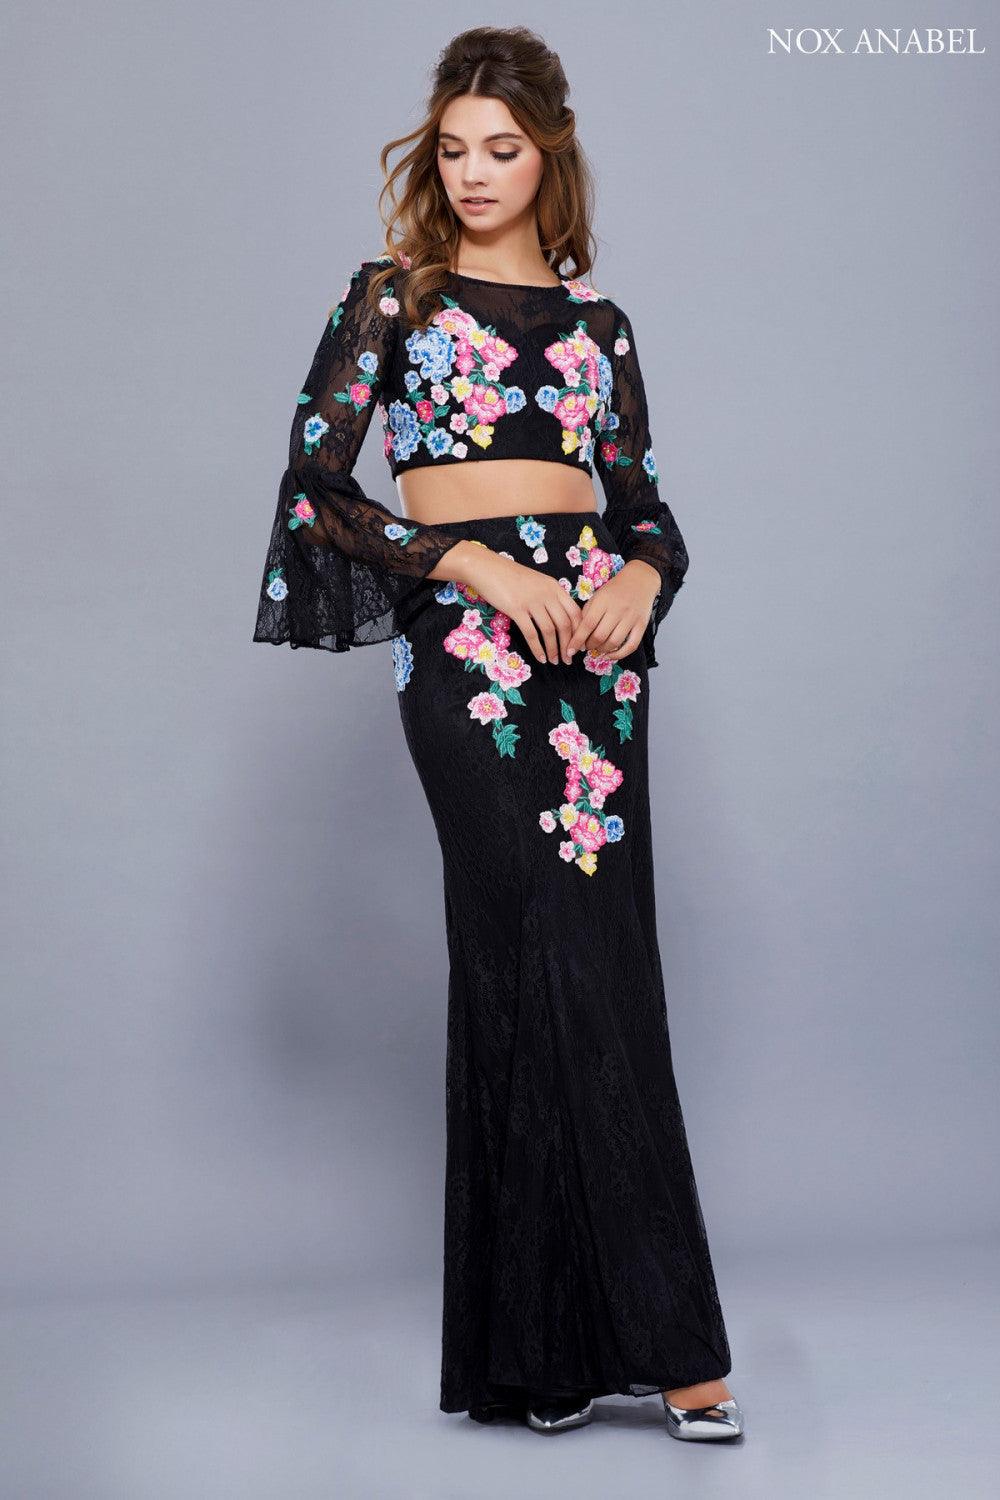 Black Long Floral Two Piece Bell Sleeve Prom Dress Evening Gown for $94.99  – The Dress Outlet